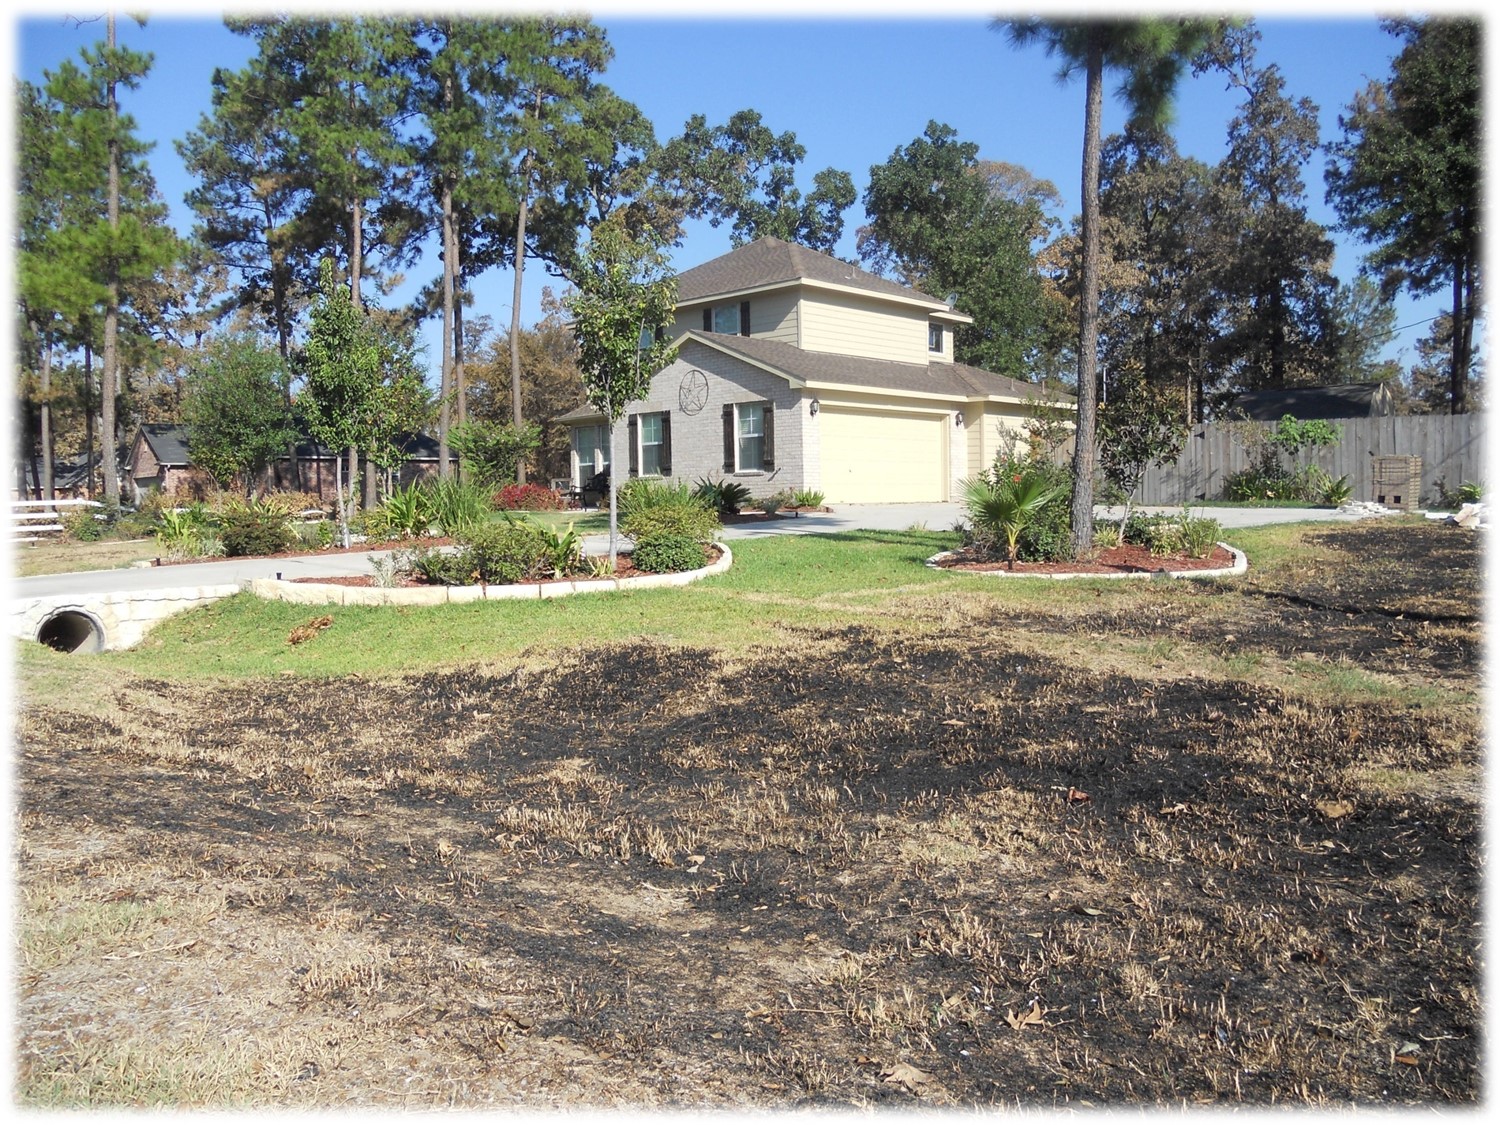 BURNT GRASS LEADING UP TO NON-COMBUSTIBLE LANDSCAPING